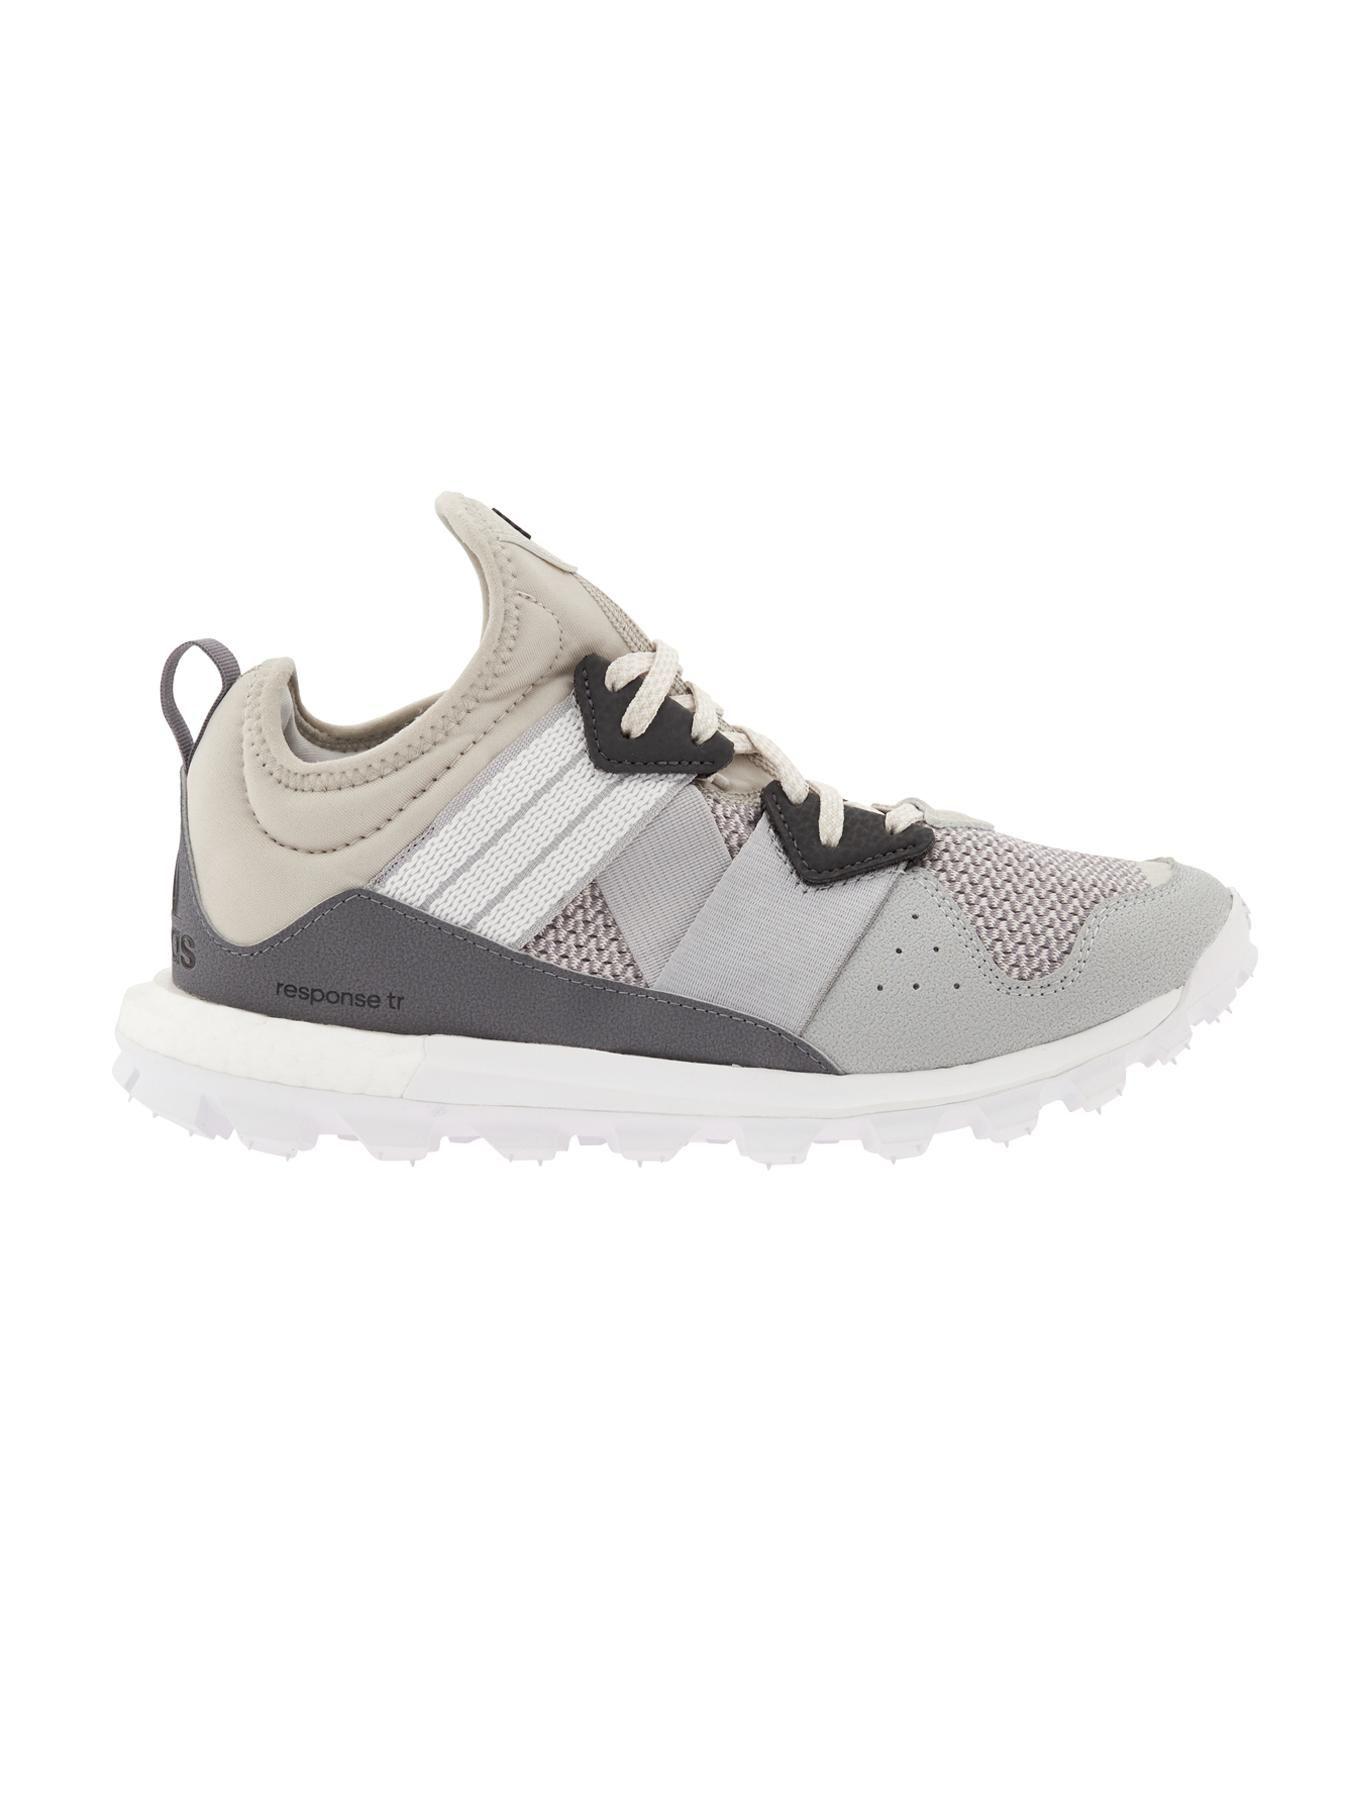 Athleta Response Trail Boost Boot W By Adidas in Gray | Lyst